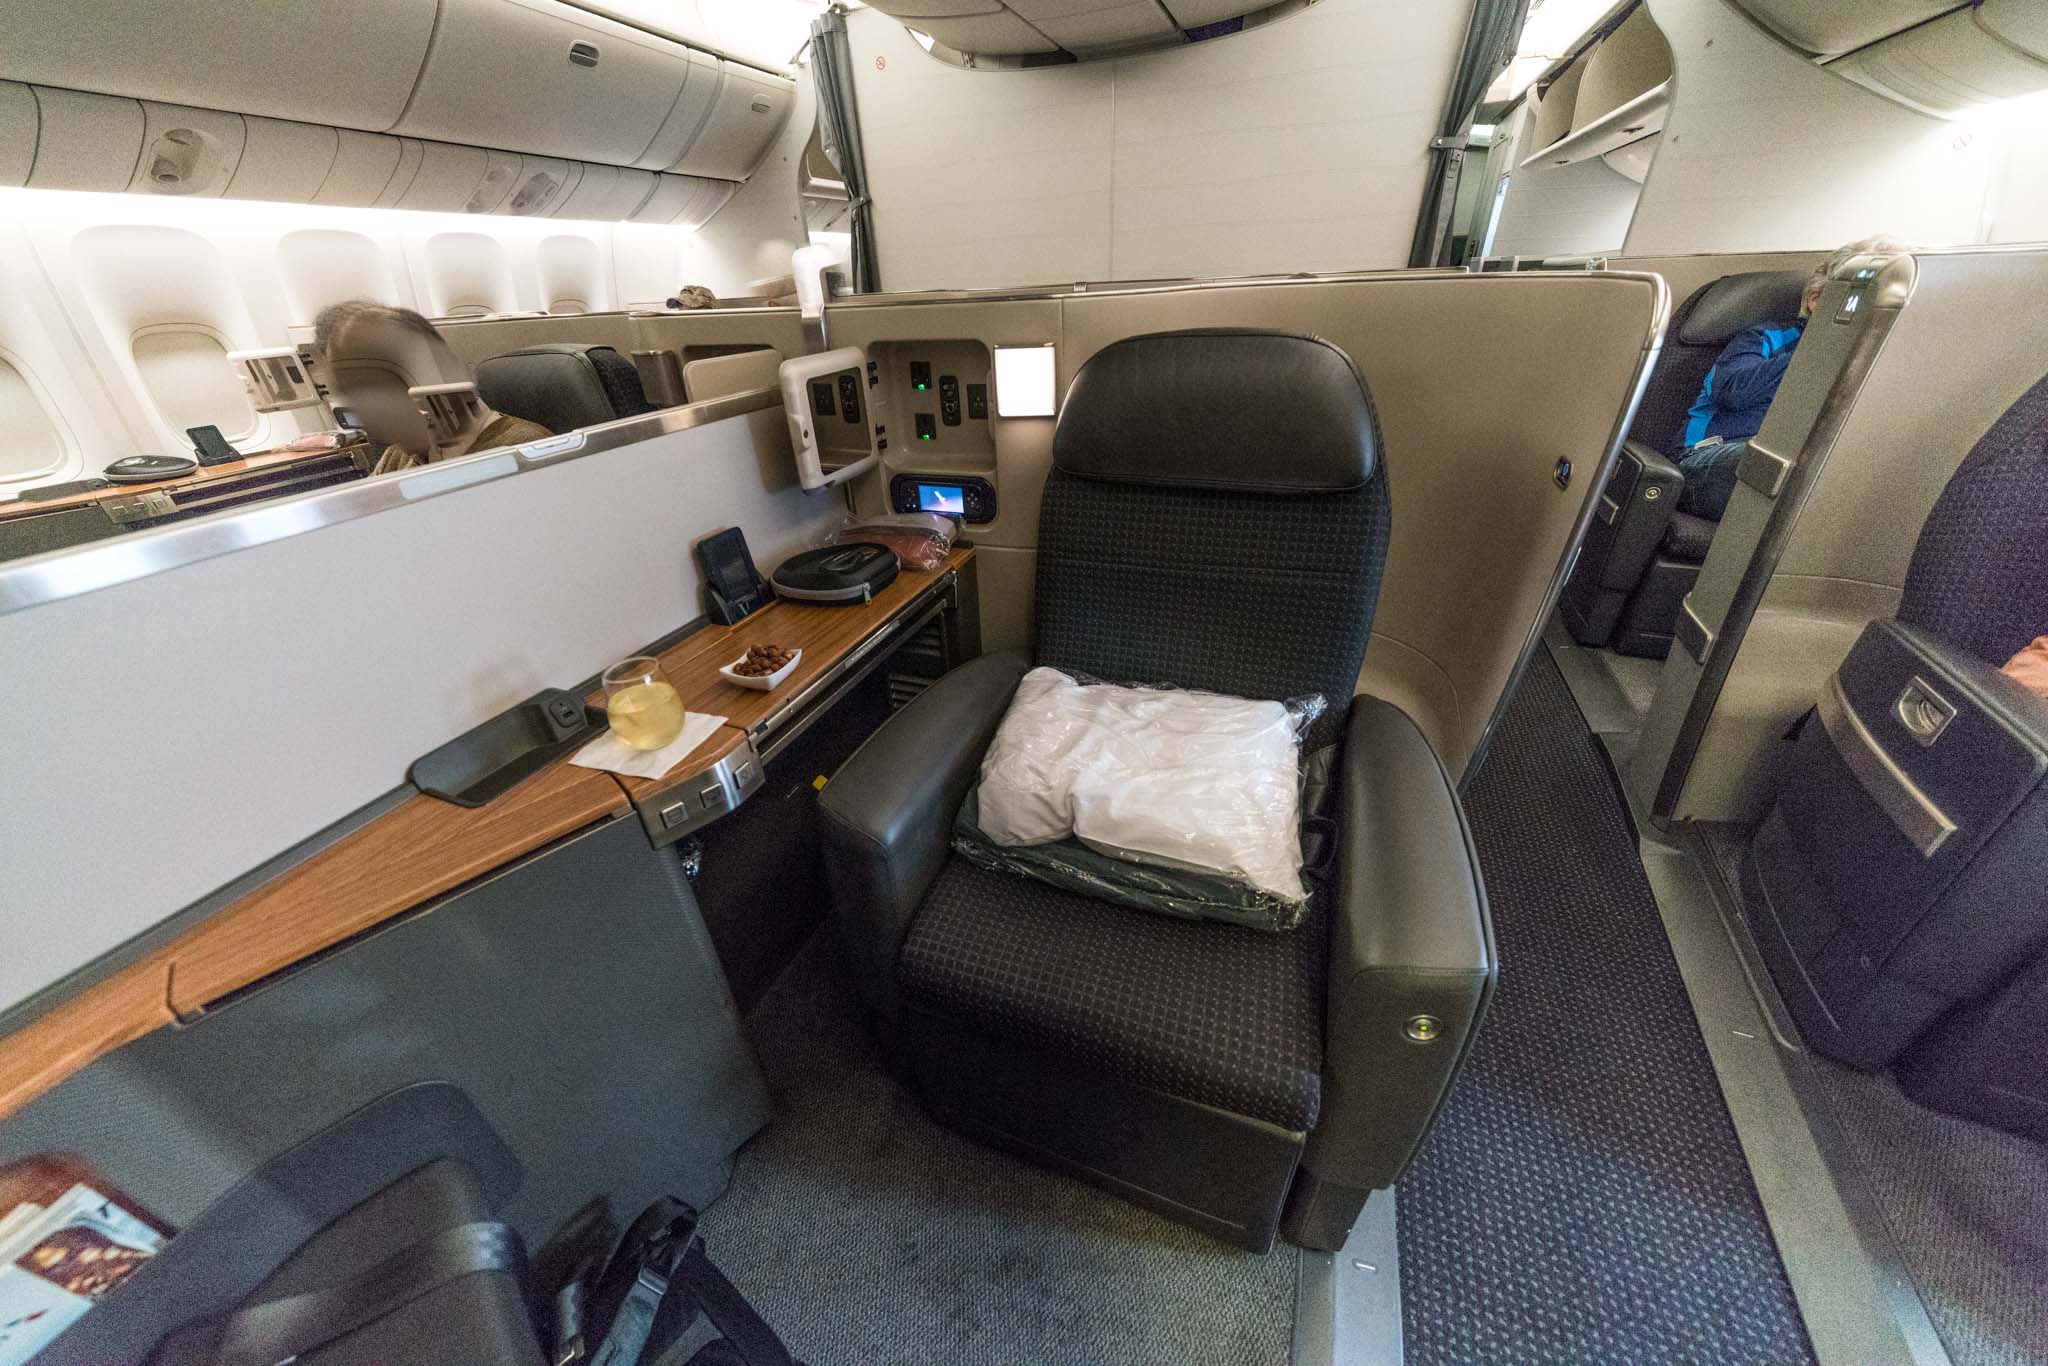 American Airlines First Class Review 1 Andys Travel Blog